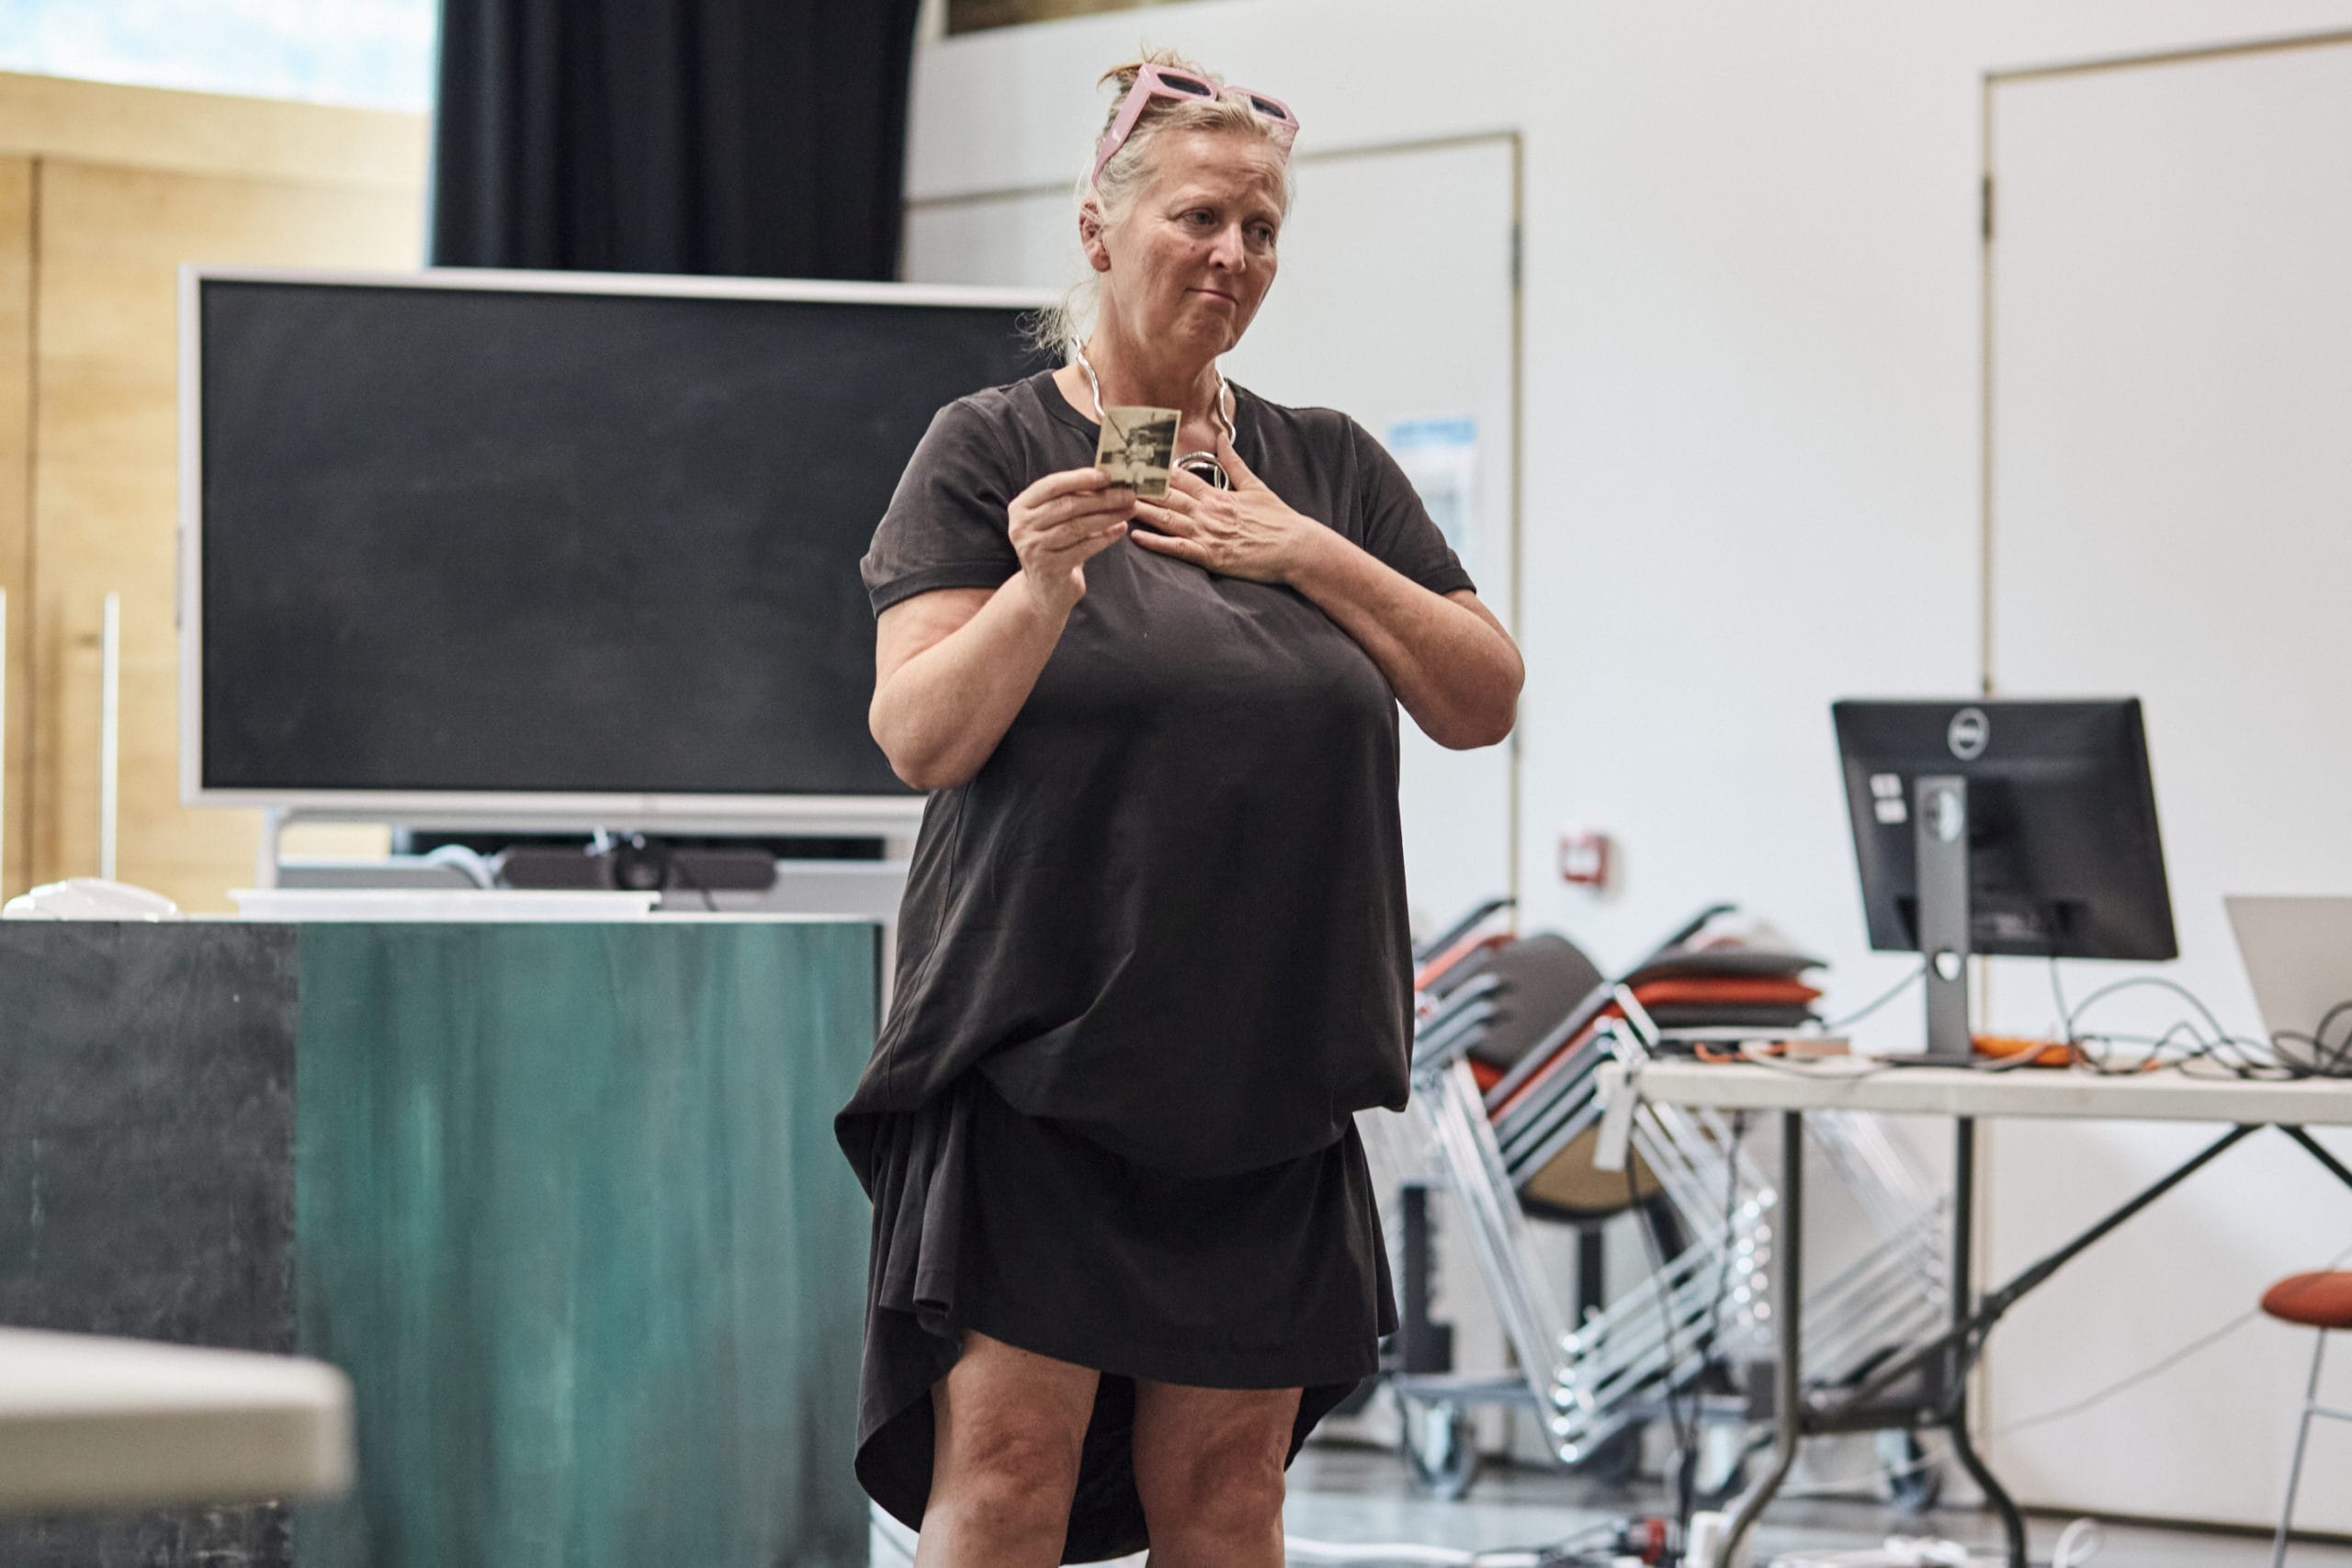 Jenny Sealey in rehearsal, she is holding a picture in one hand and clutching her chest with the other.